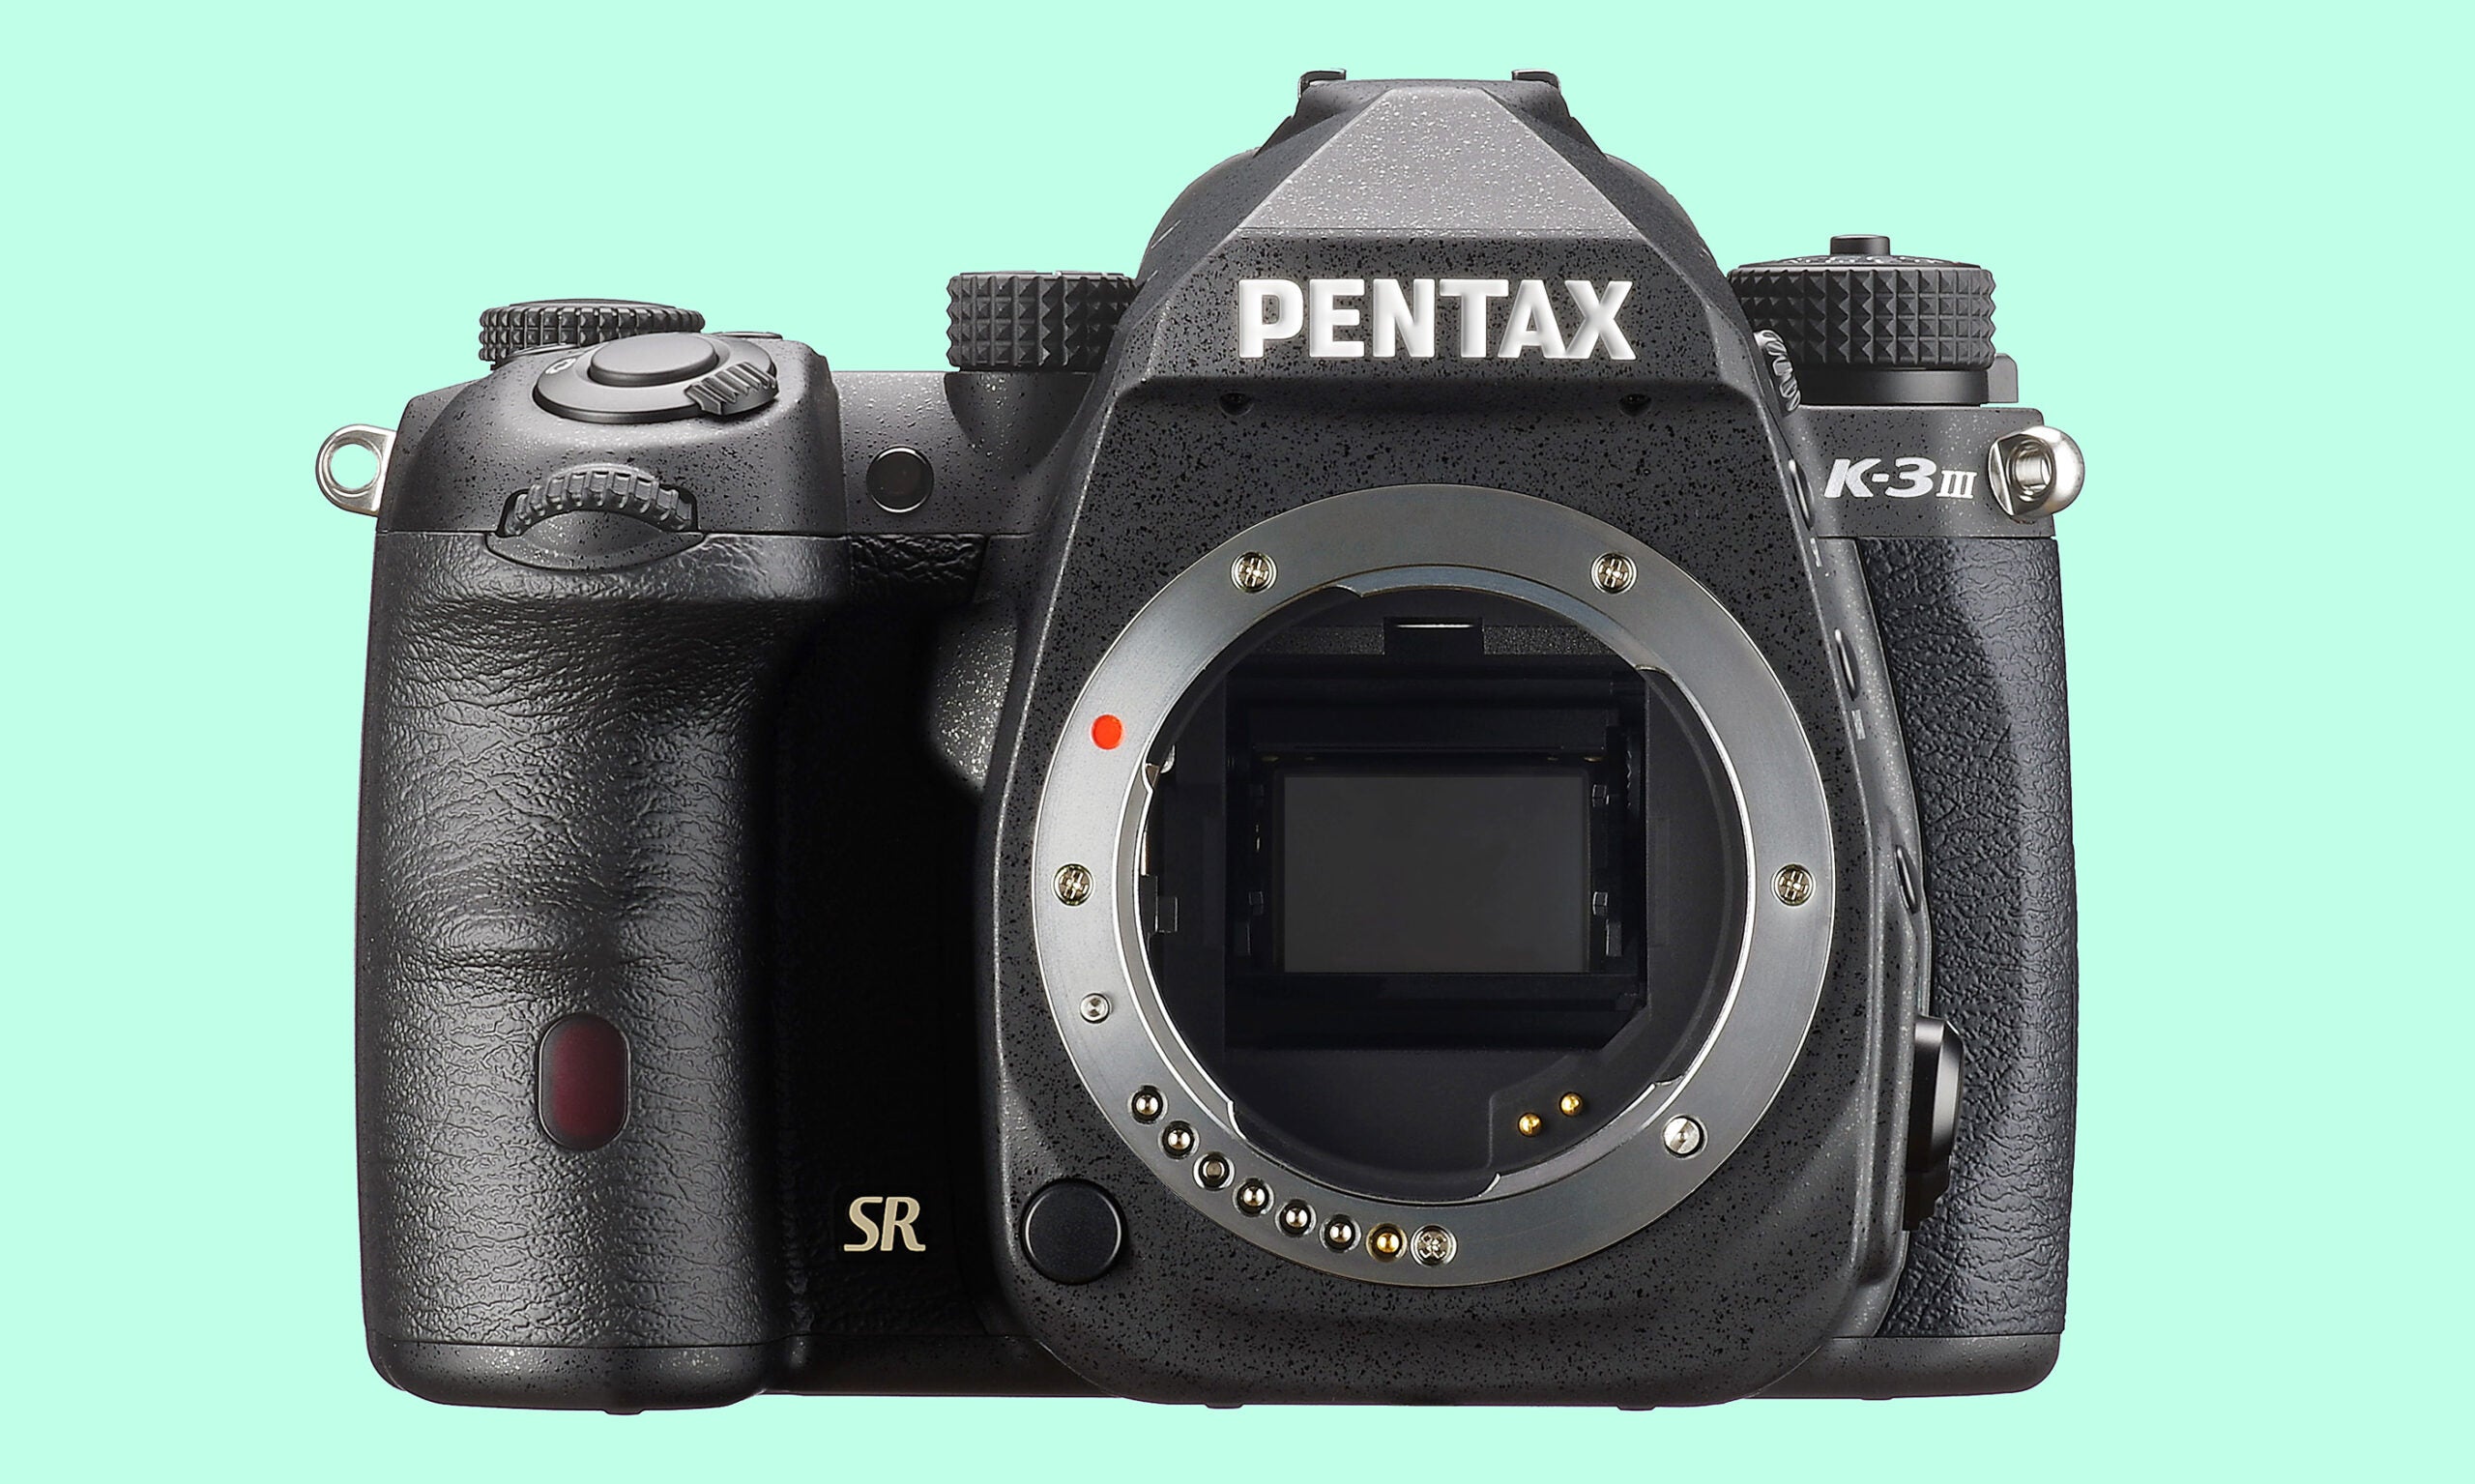 The Pentax K3 Mark III is the only DSLR that came out in 2021.